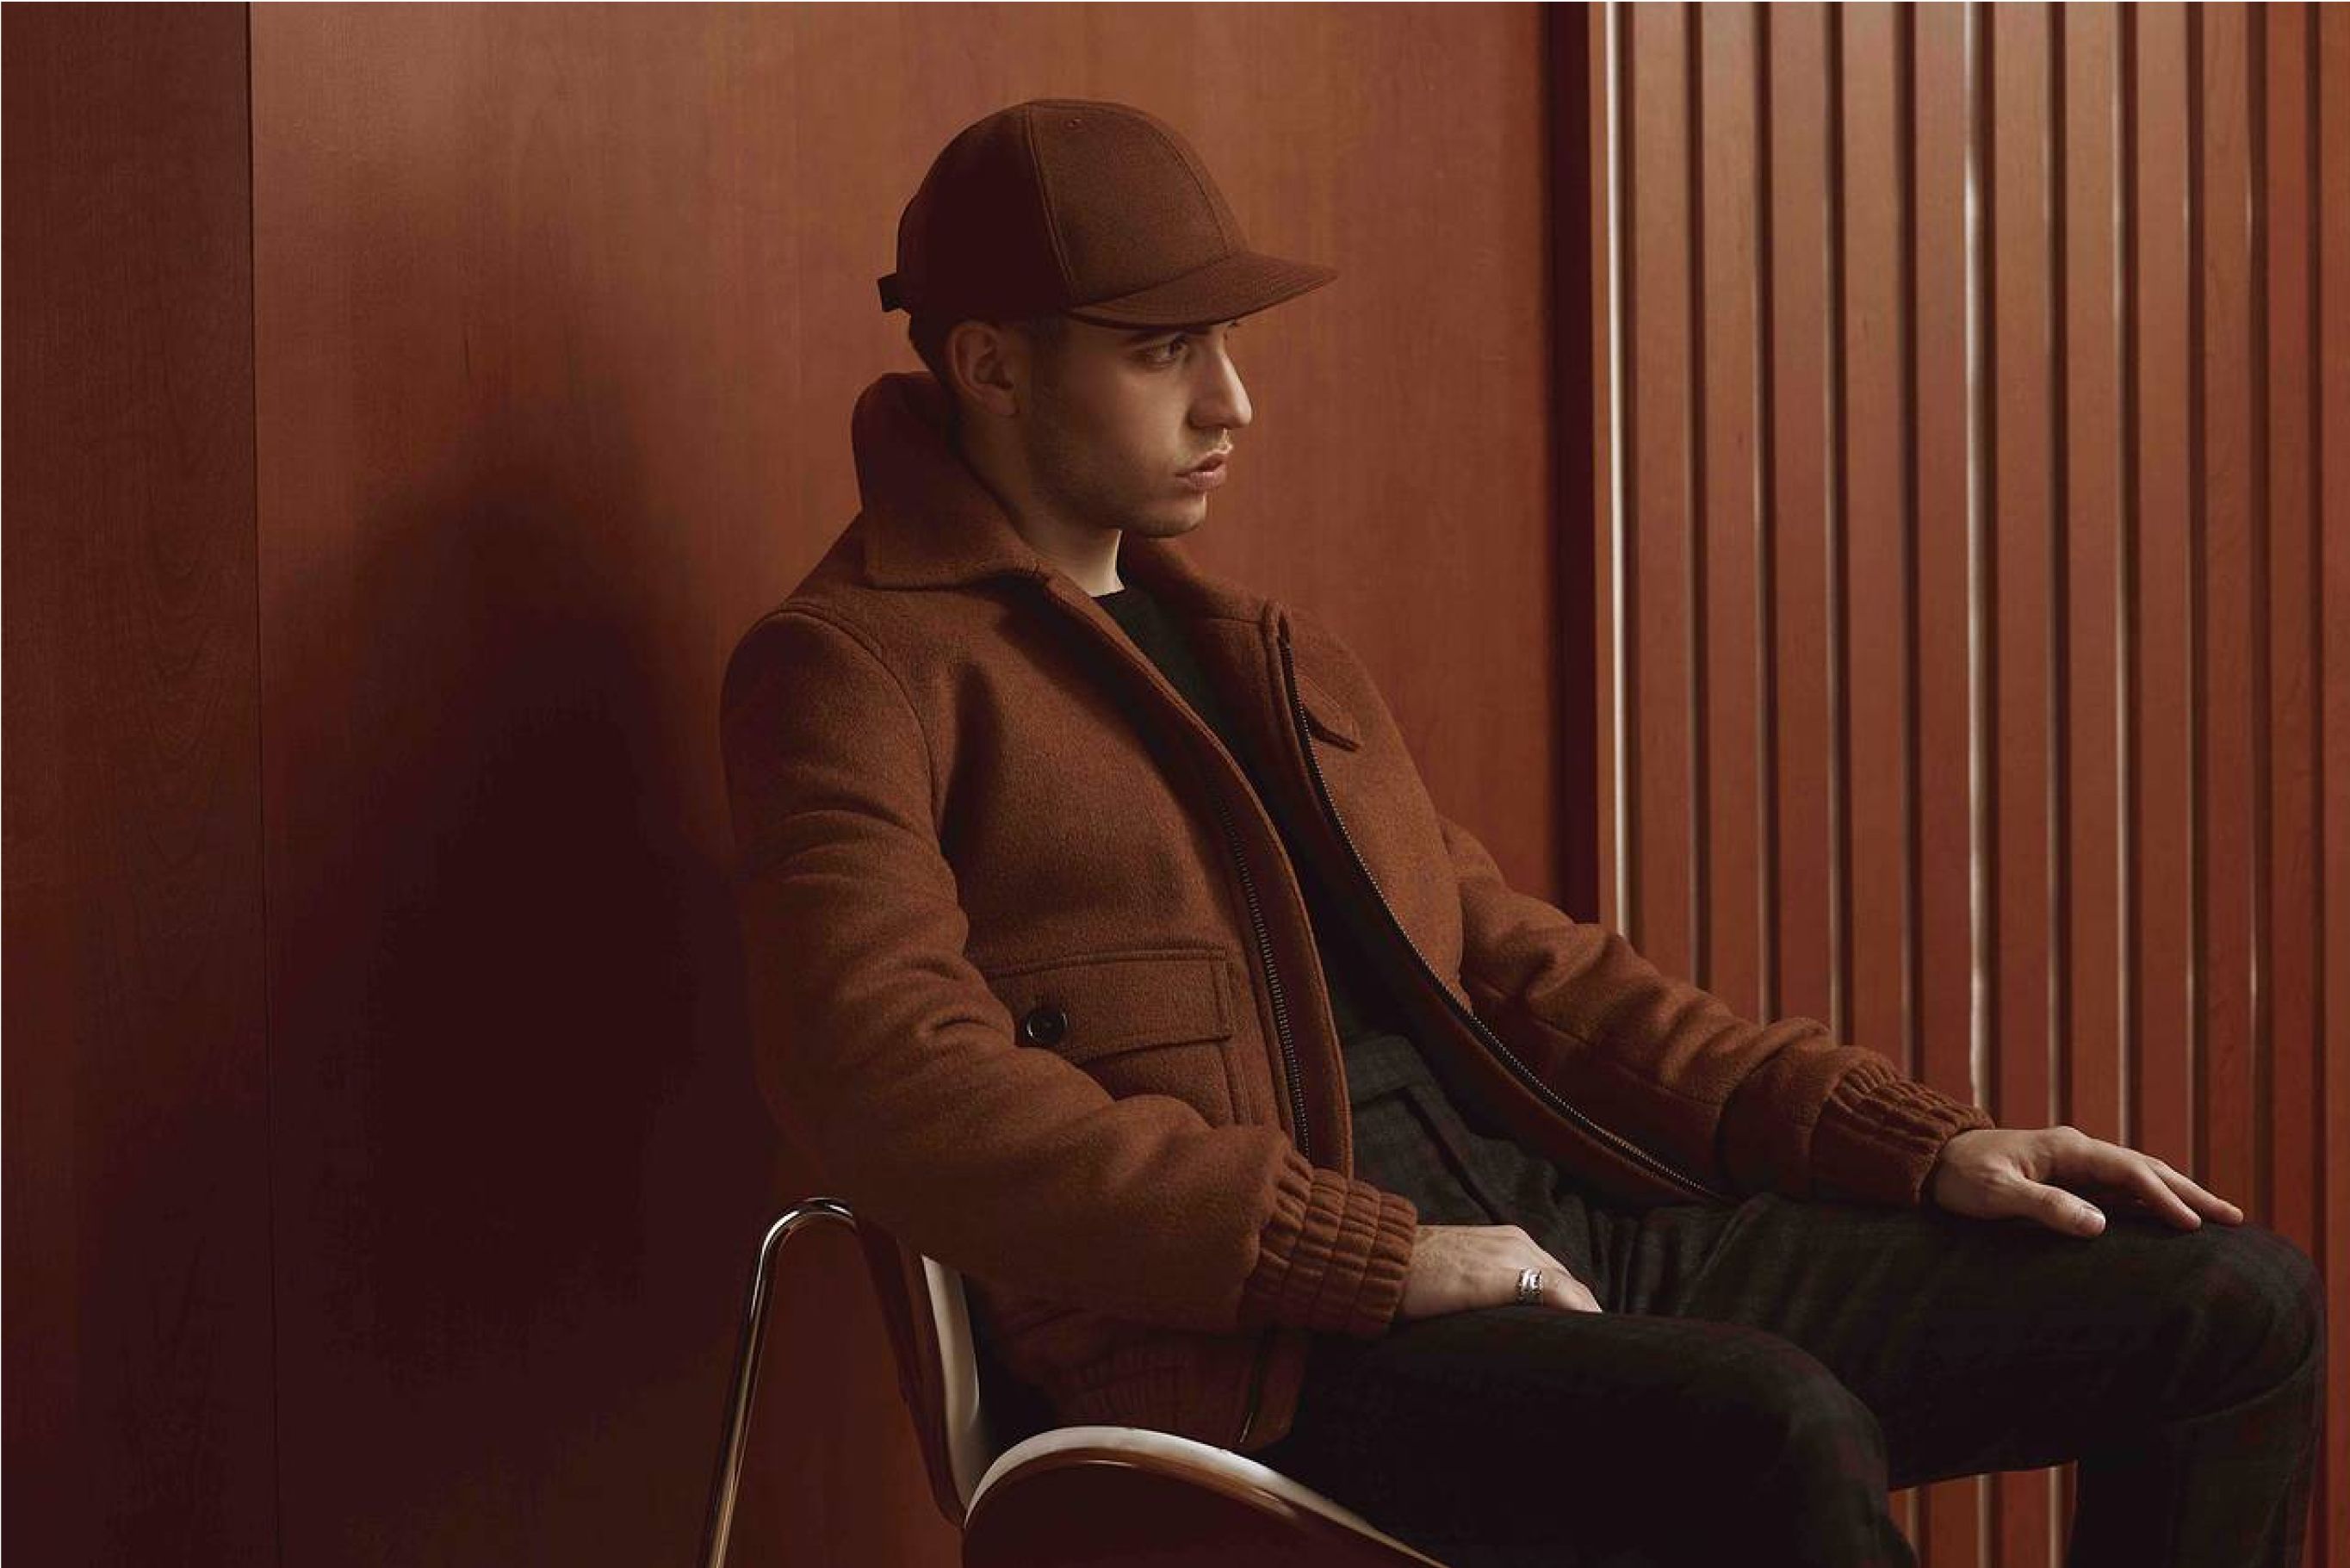 Man sitting in all brown Frank & Oak outfit